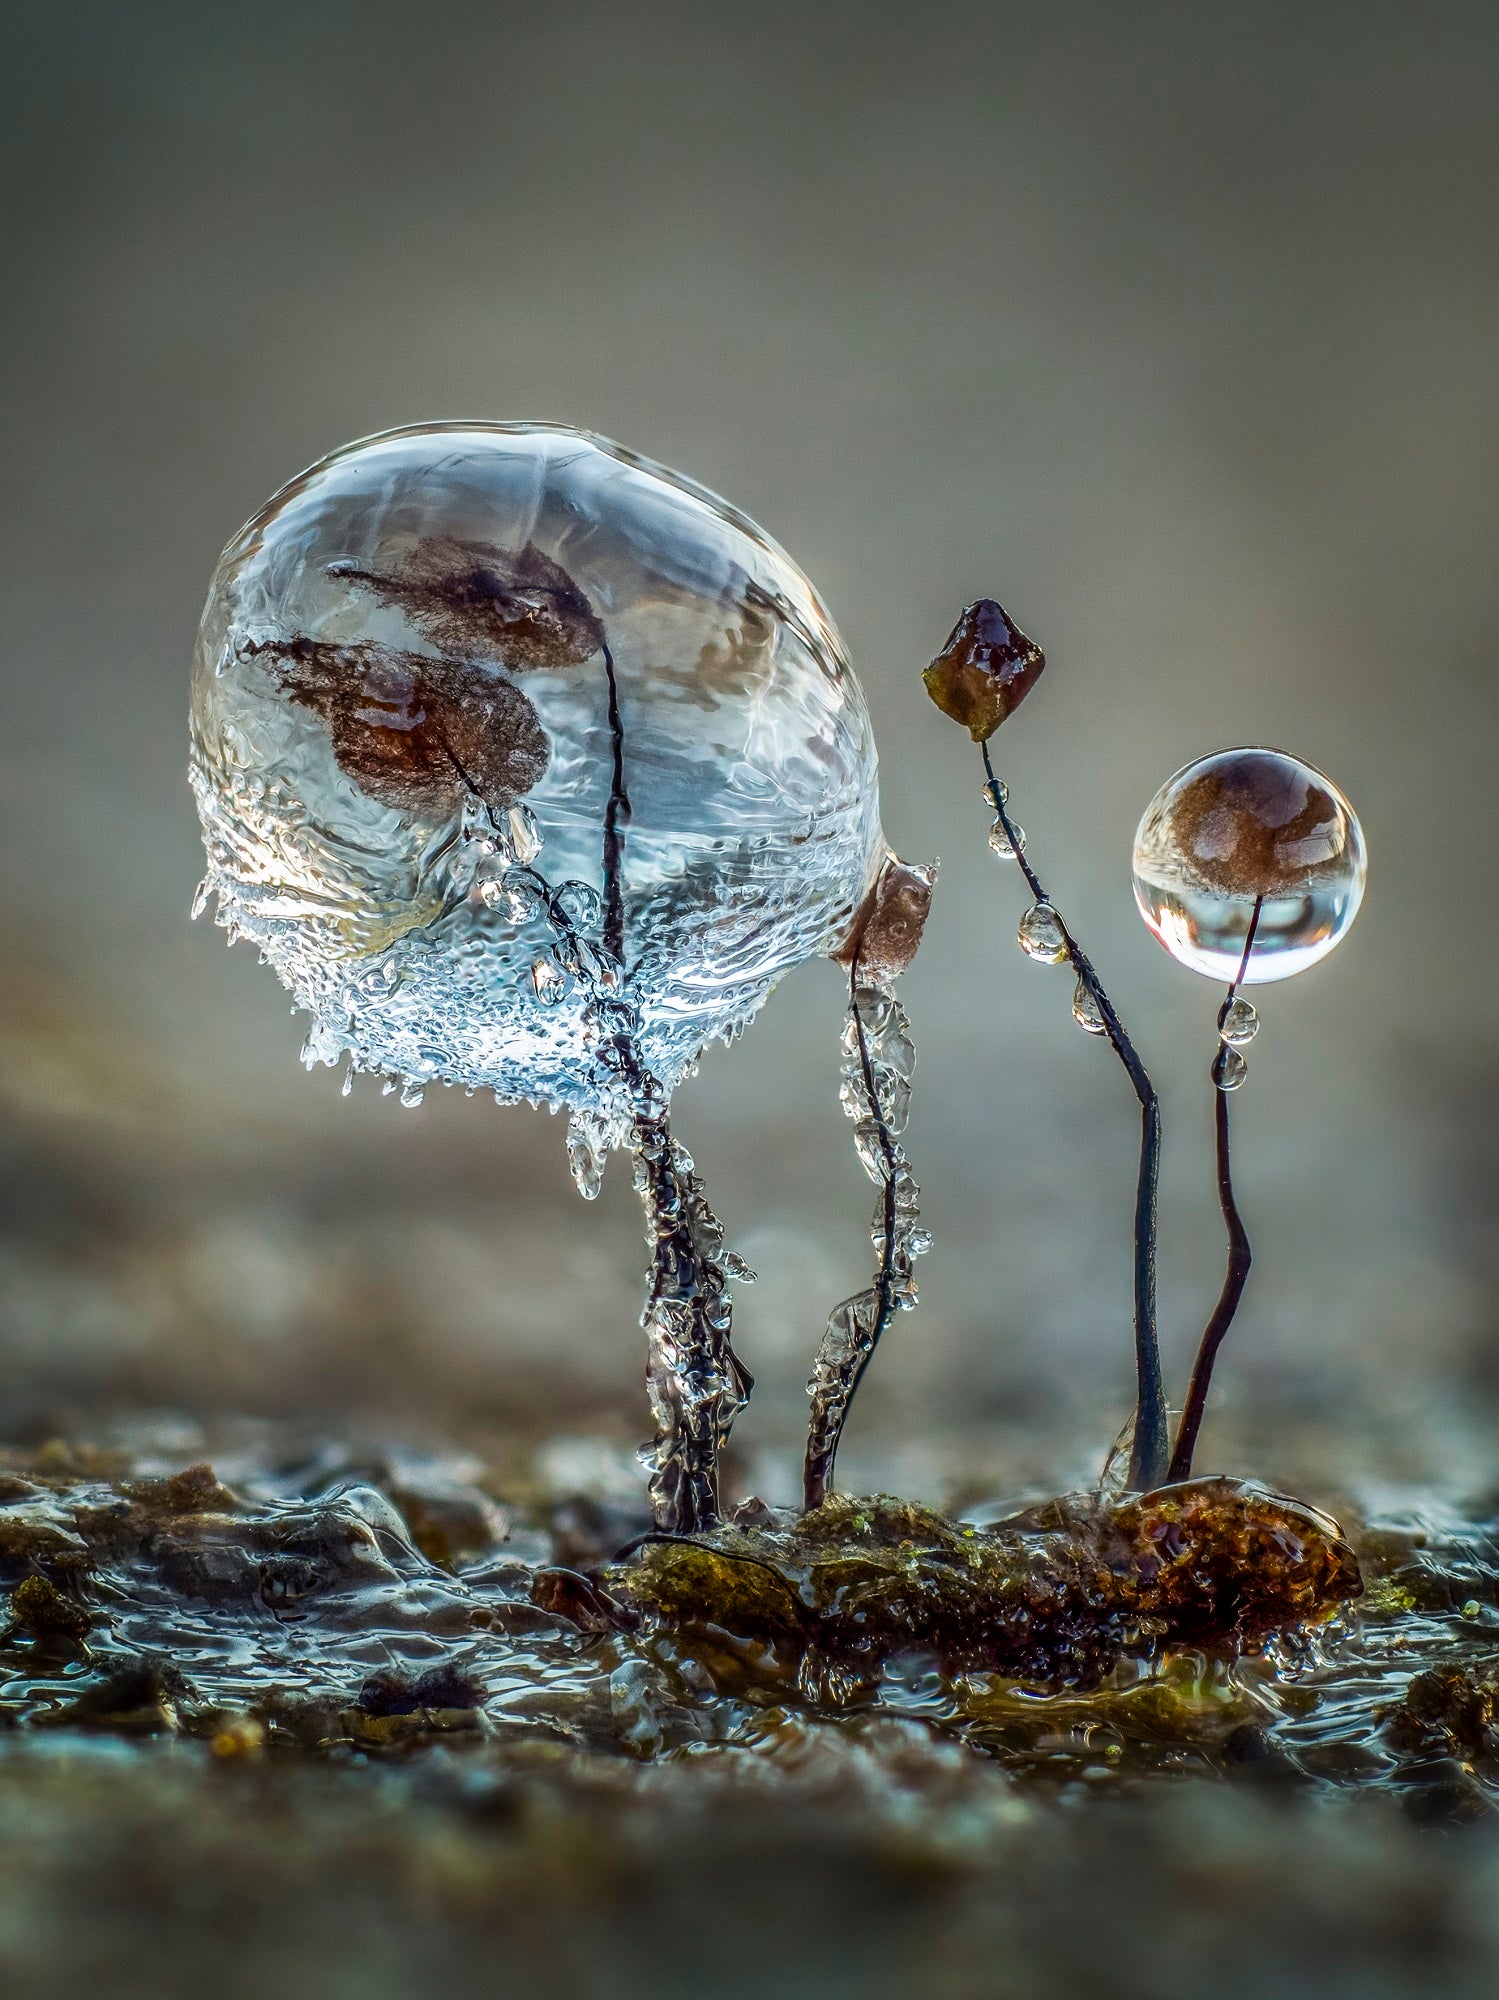 Slime mold strands encased in ice captured for photography awards